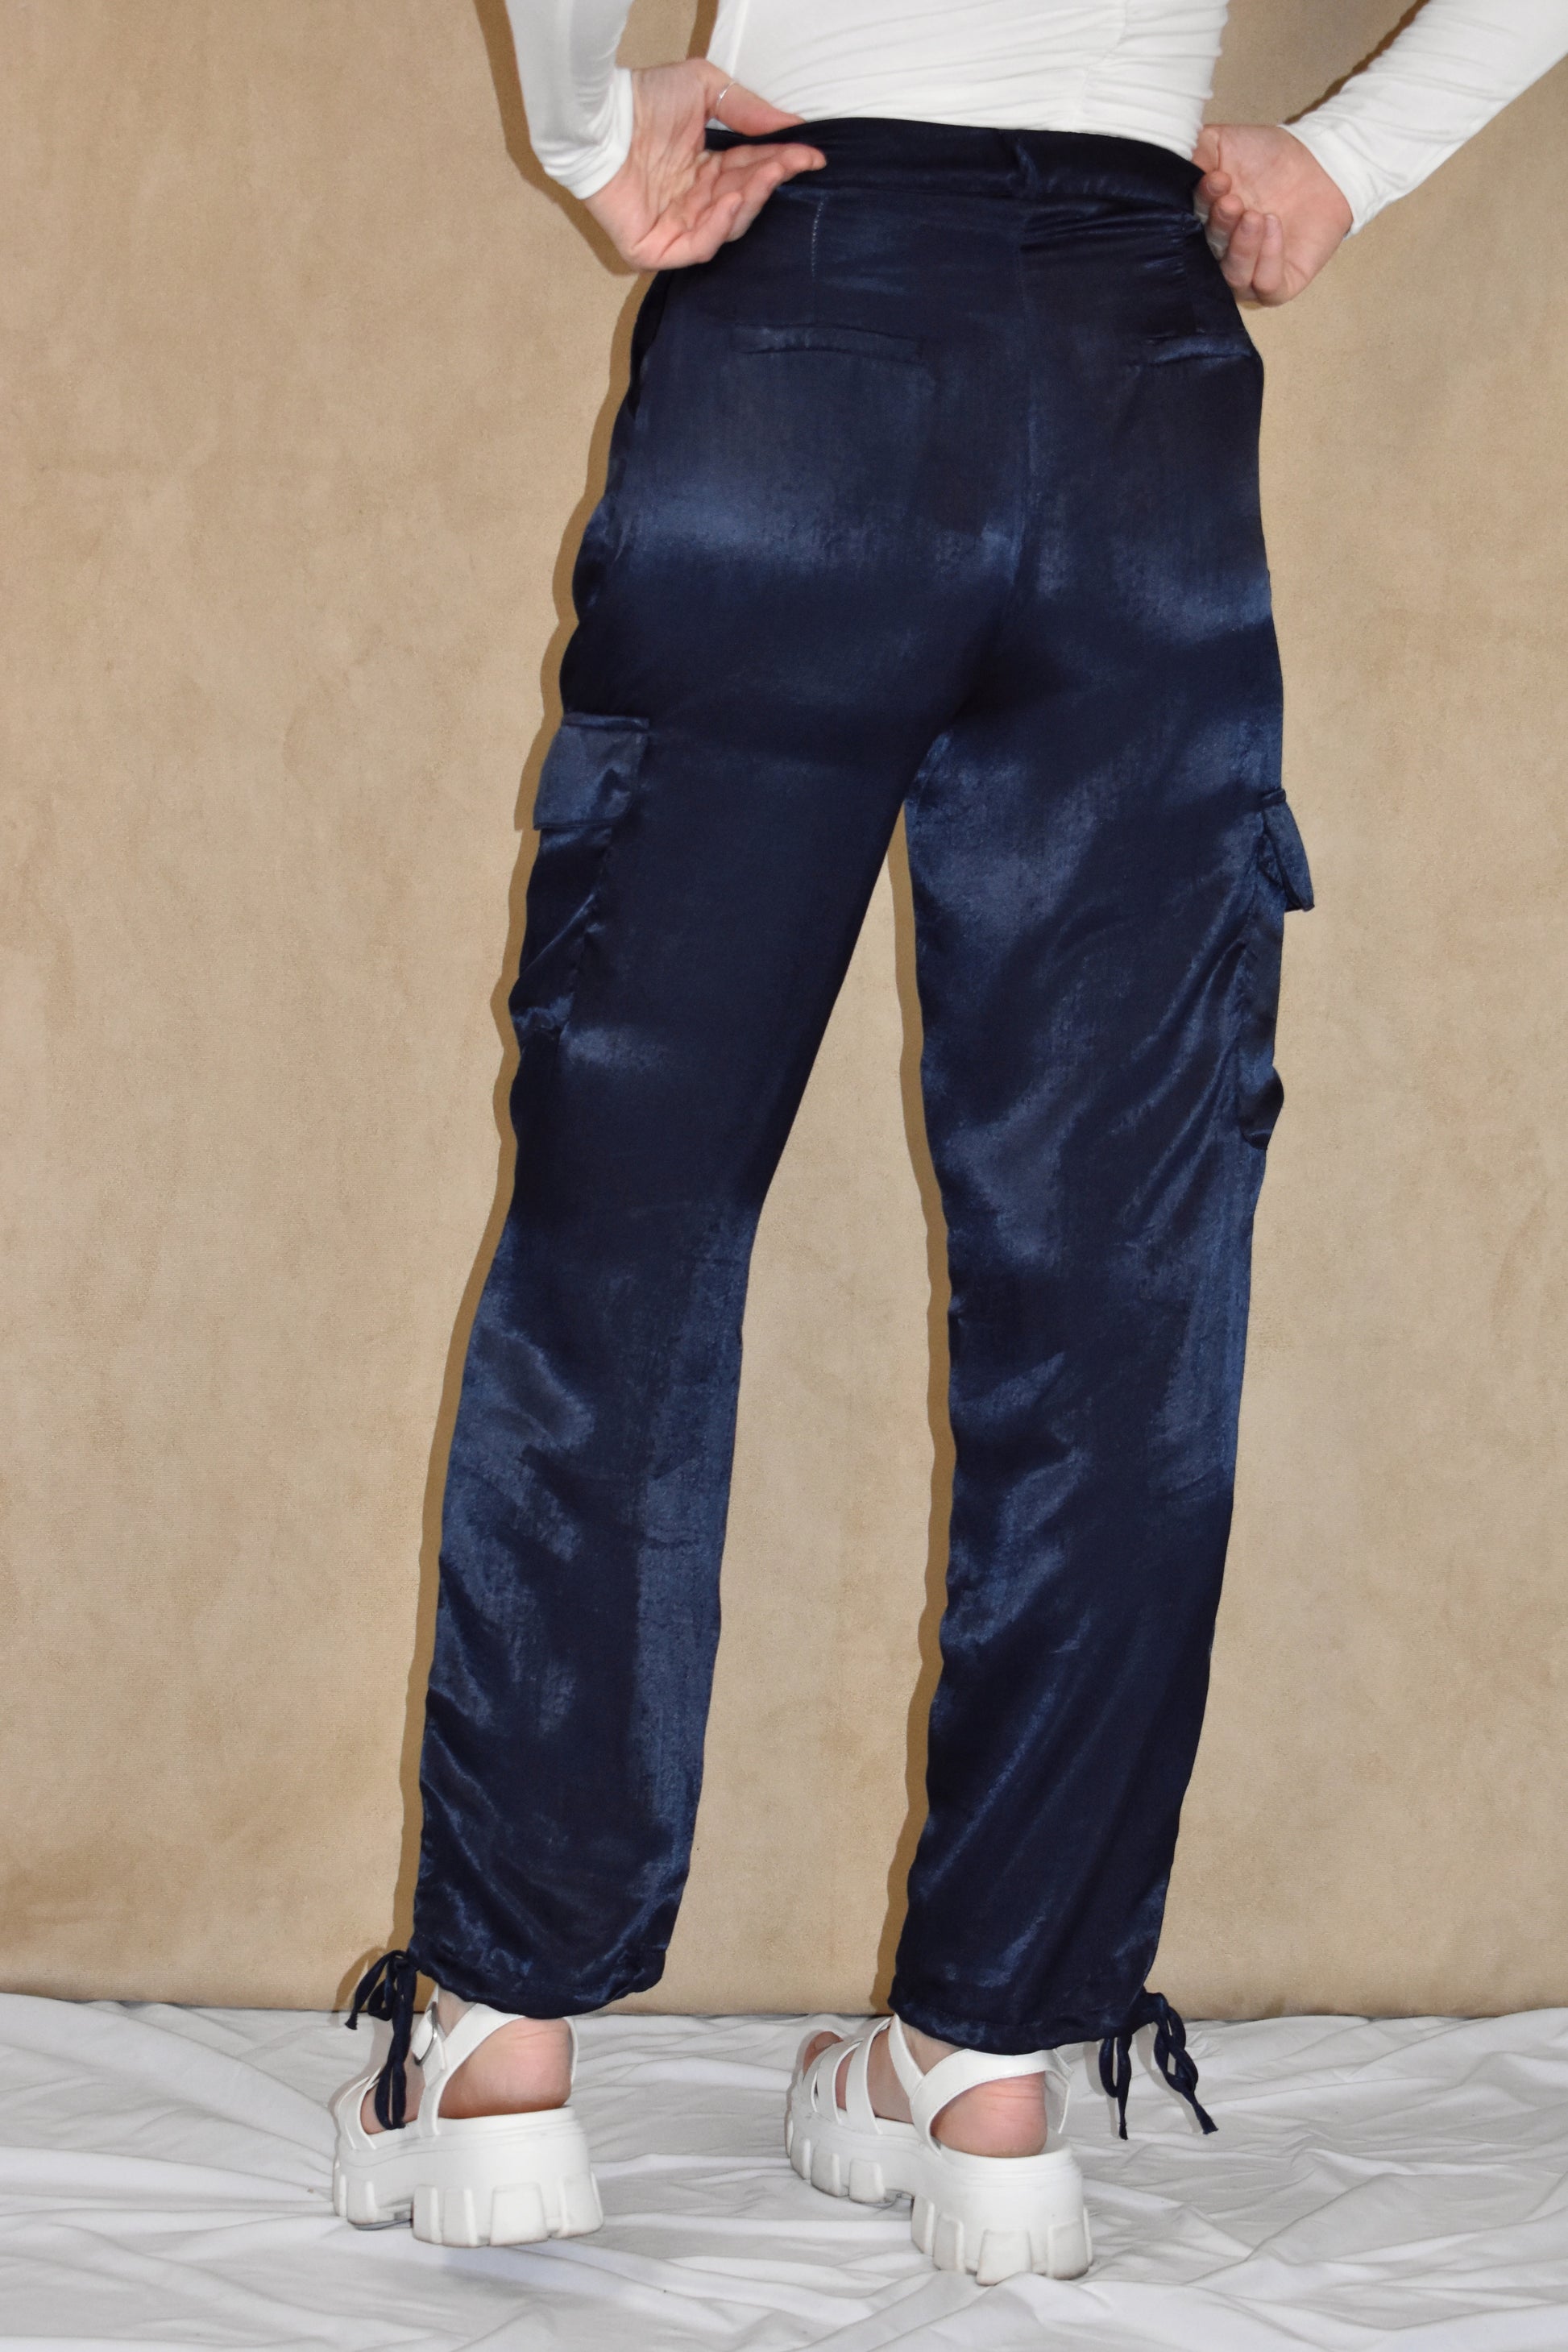 dark blue satin cargo pants. side pockets with top flap and drawstring on the bottom.